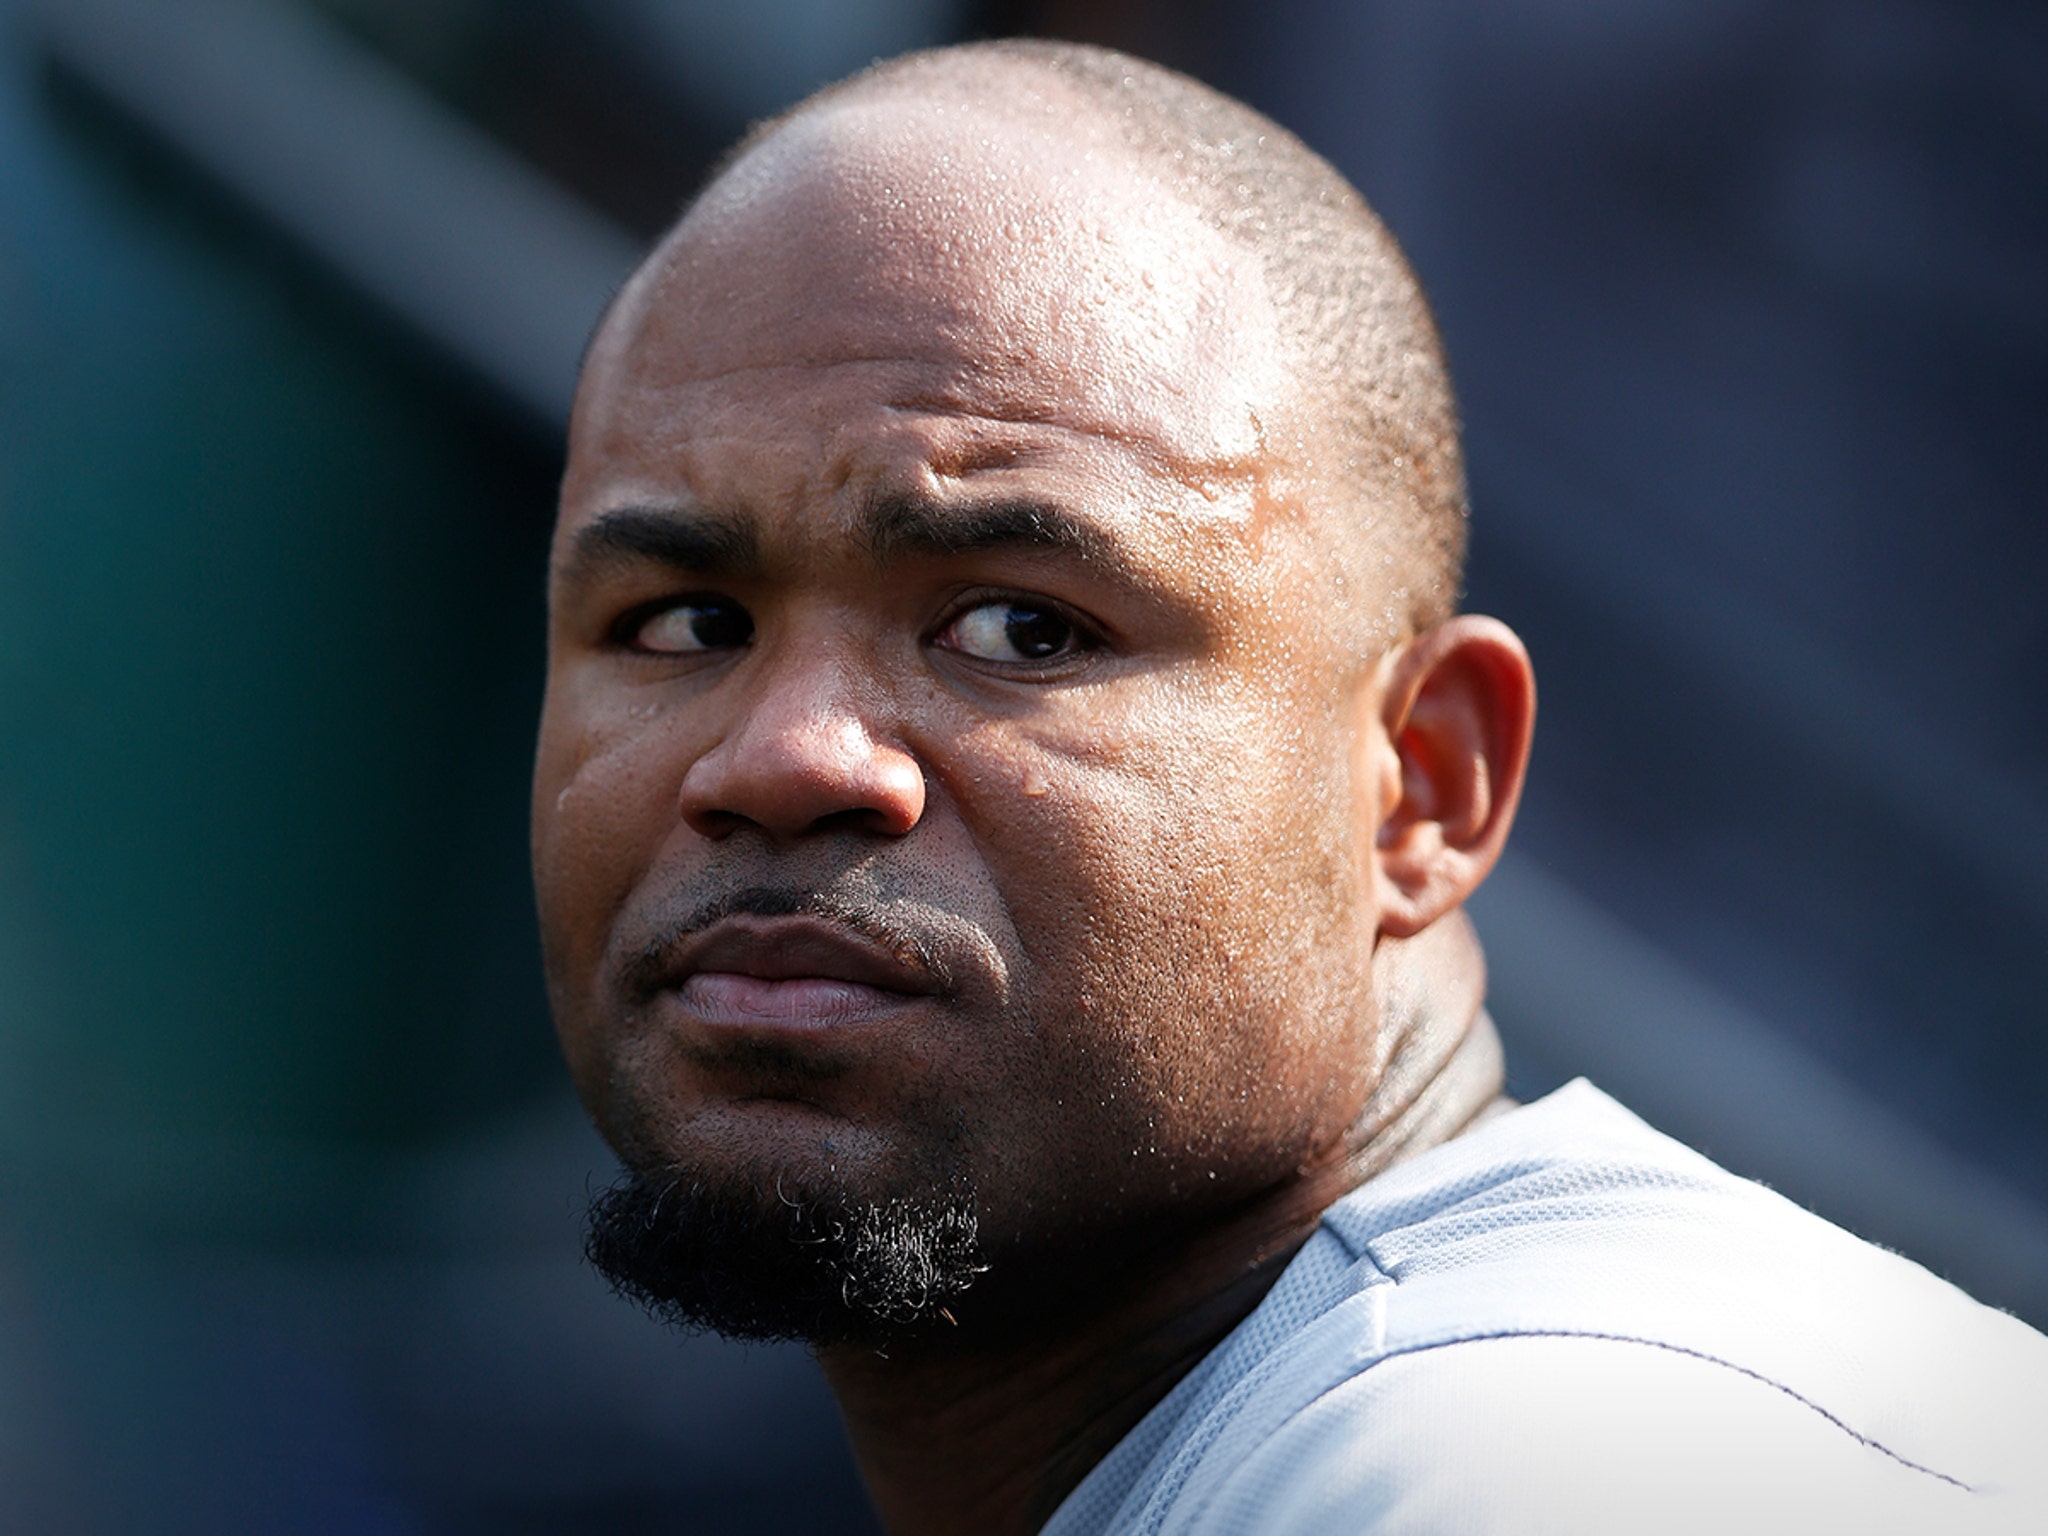 Two people drowned in pool at Carl Crawford's house?